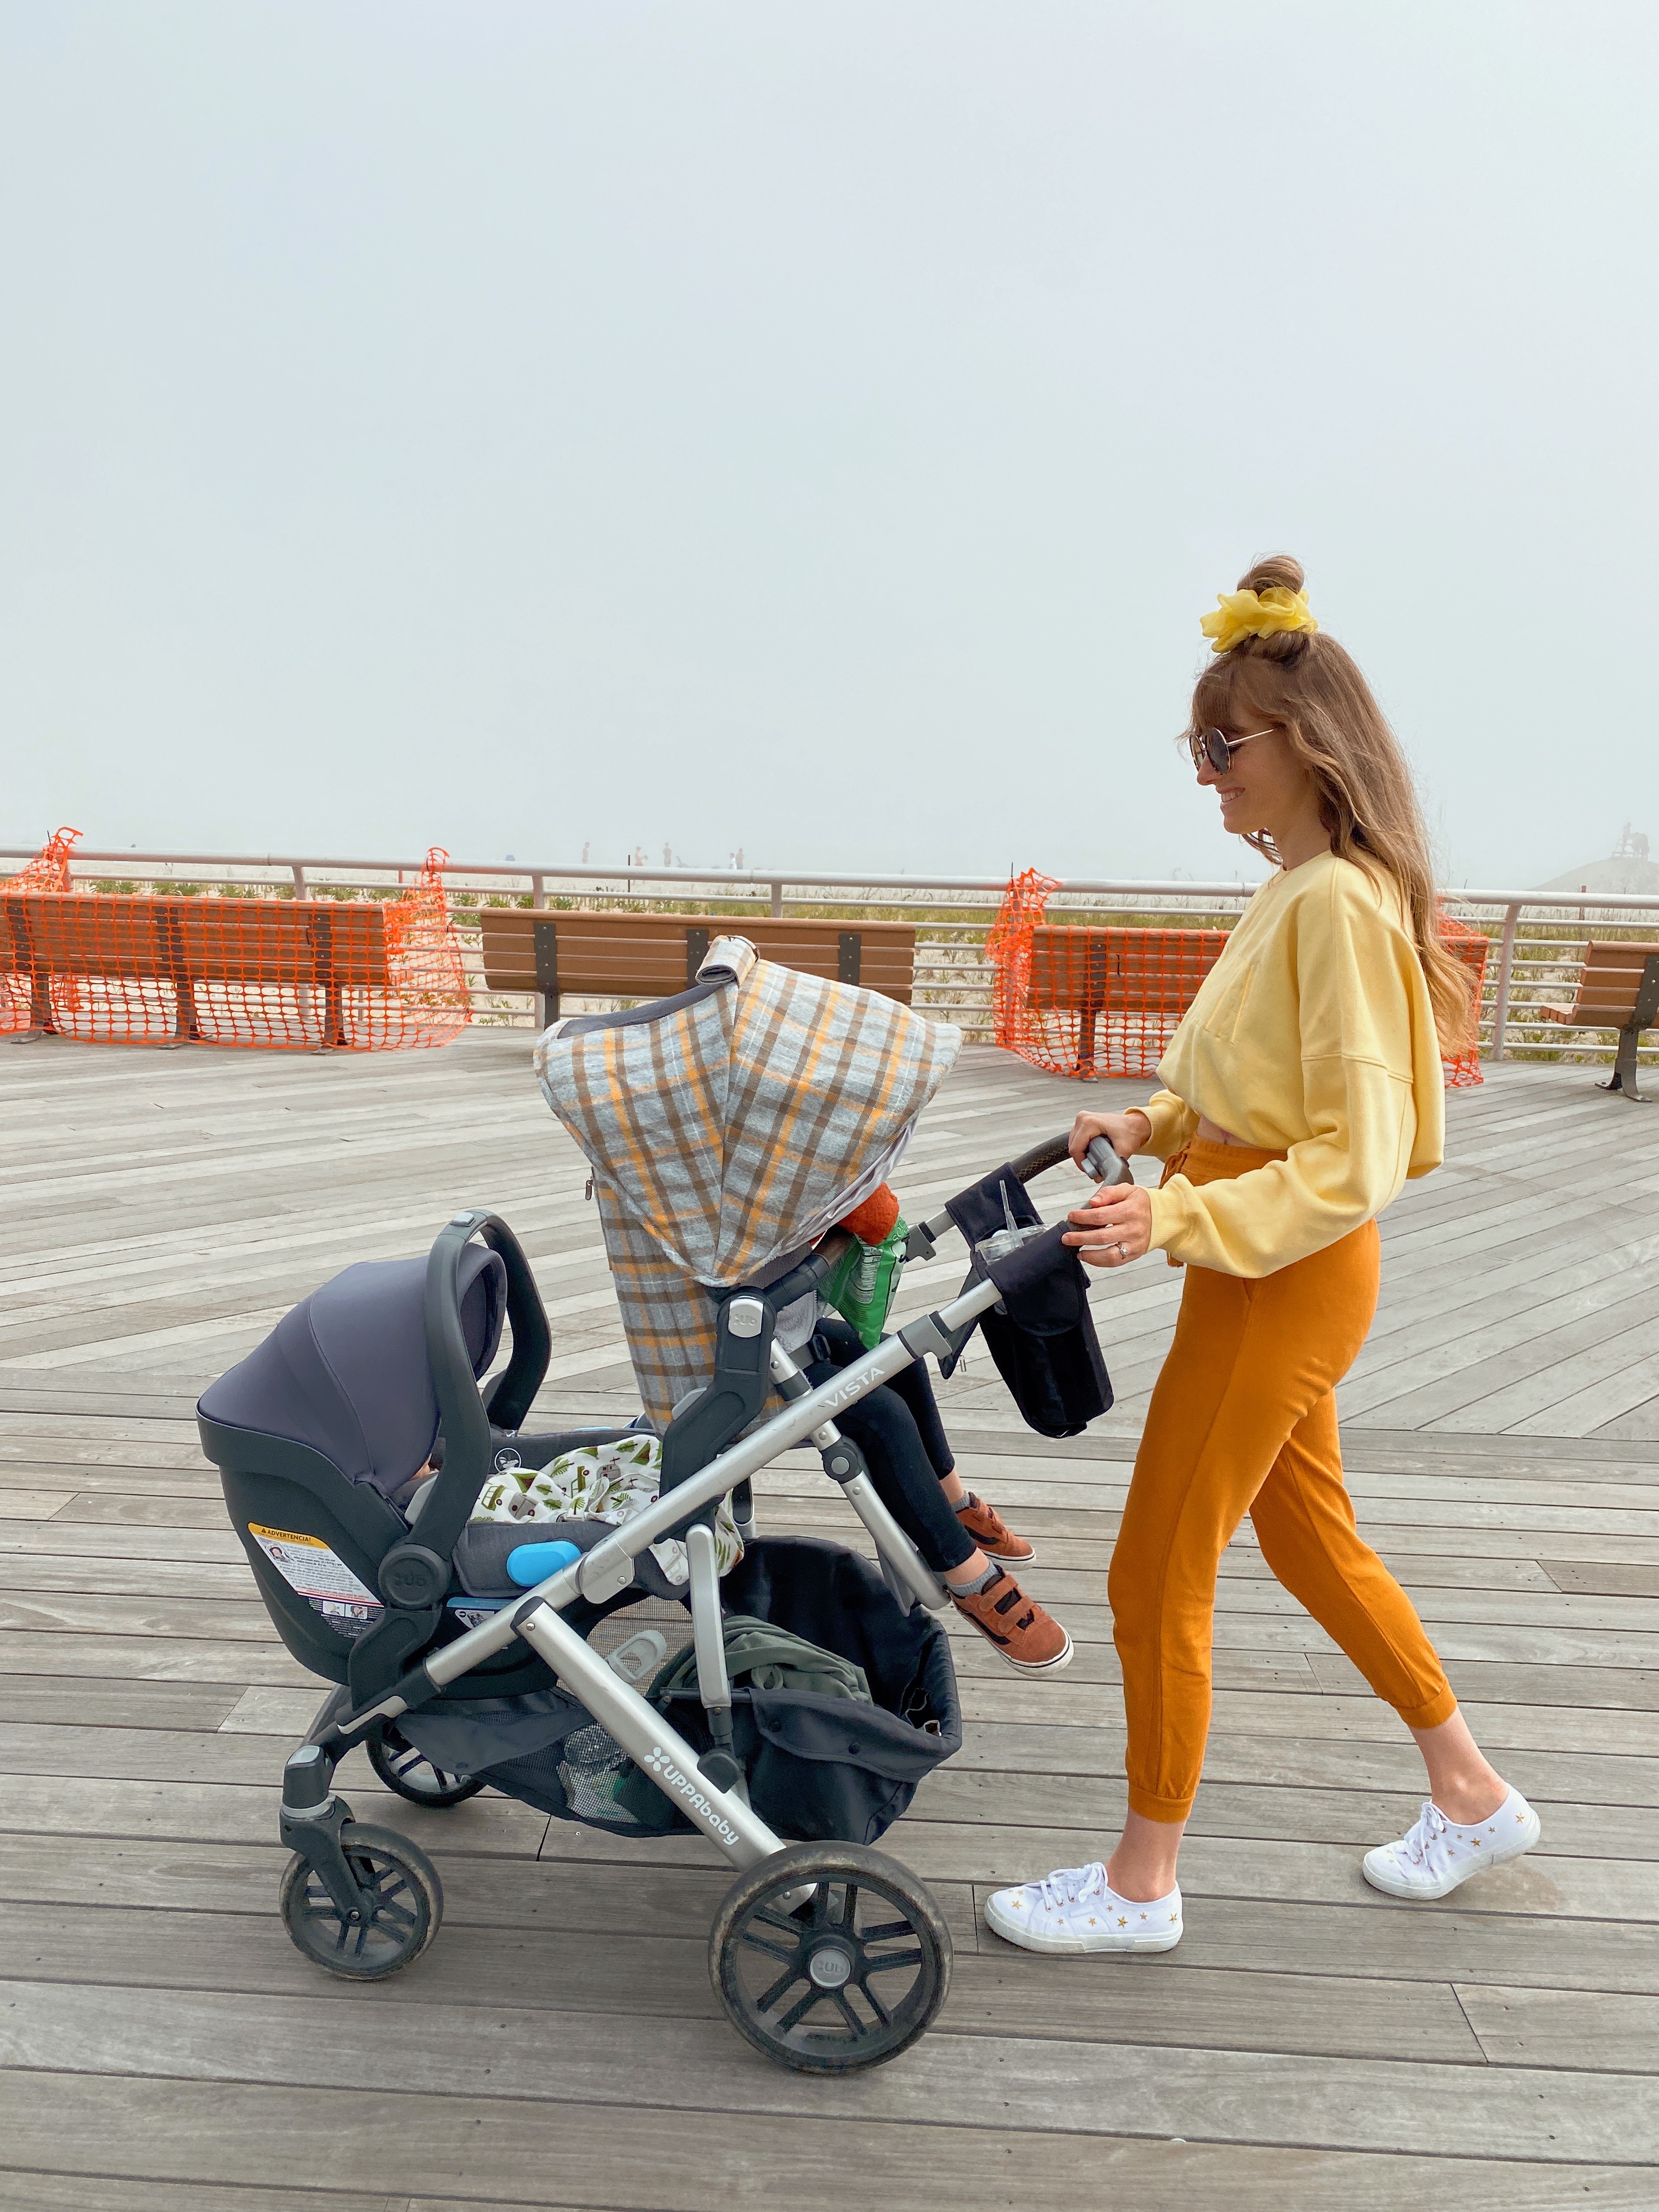 Our Double Stroller + Car Seat Review